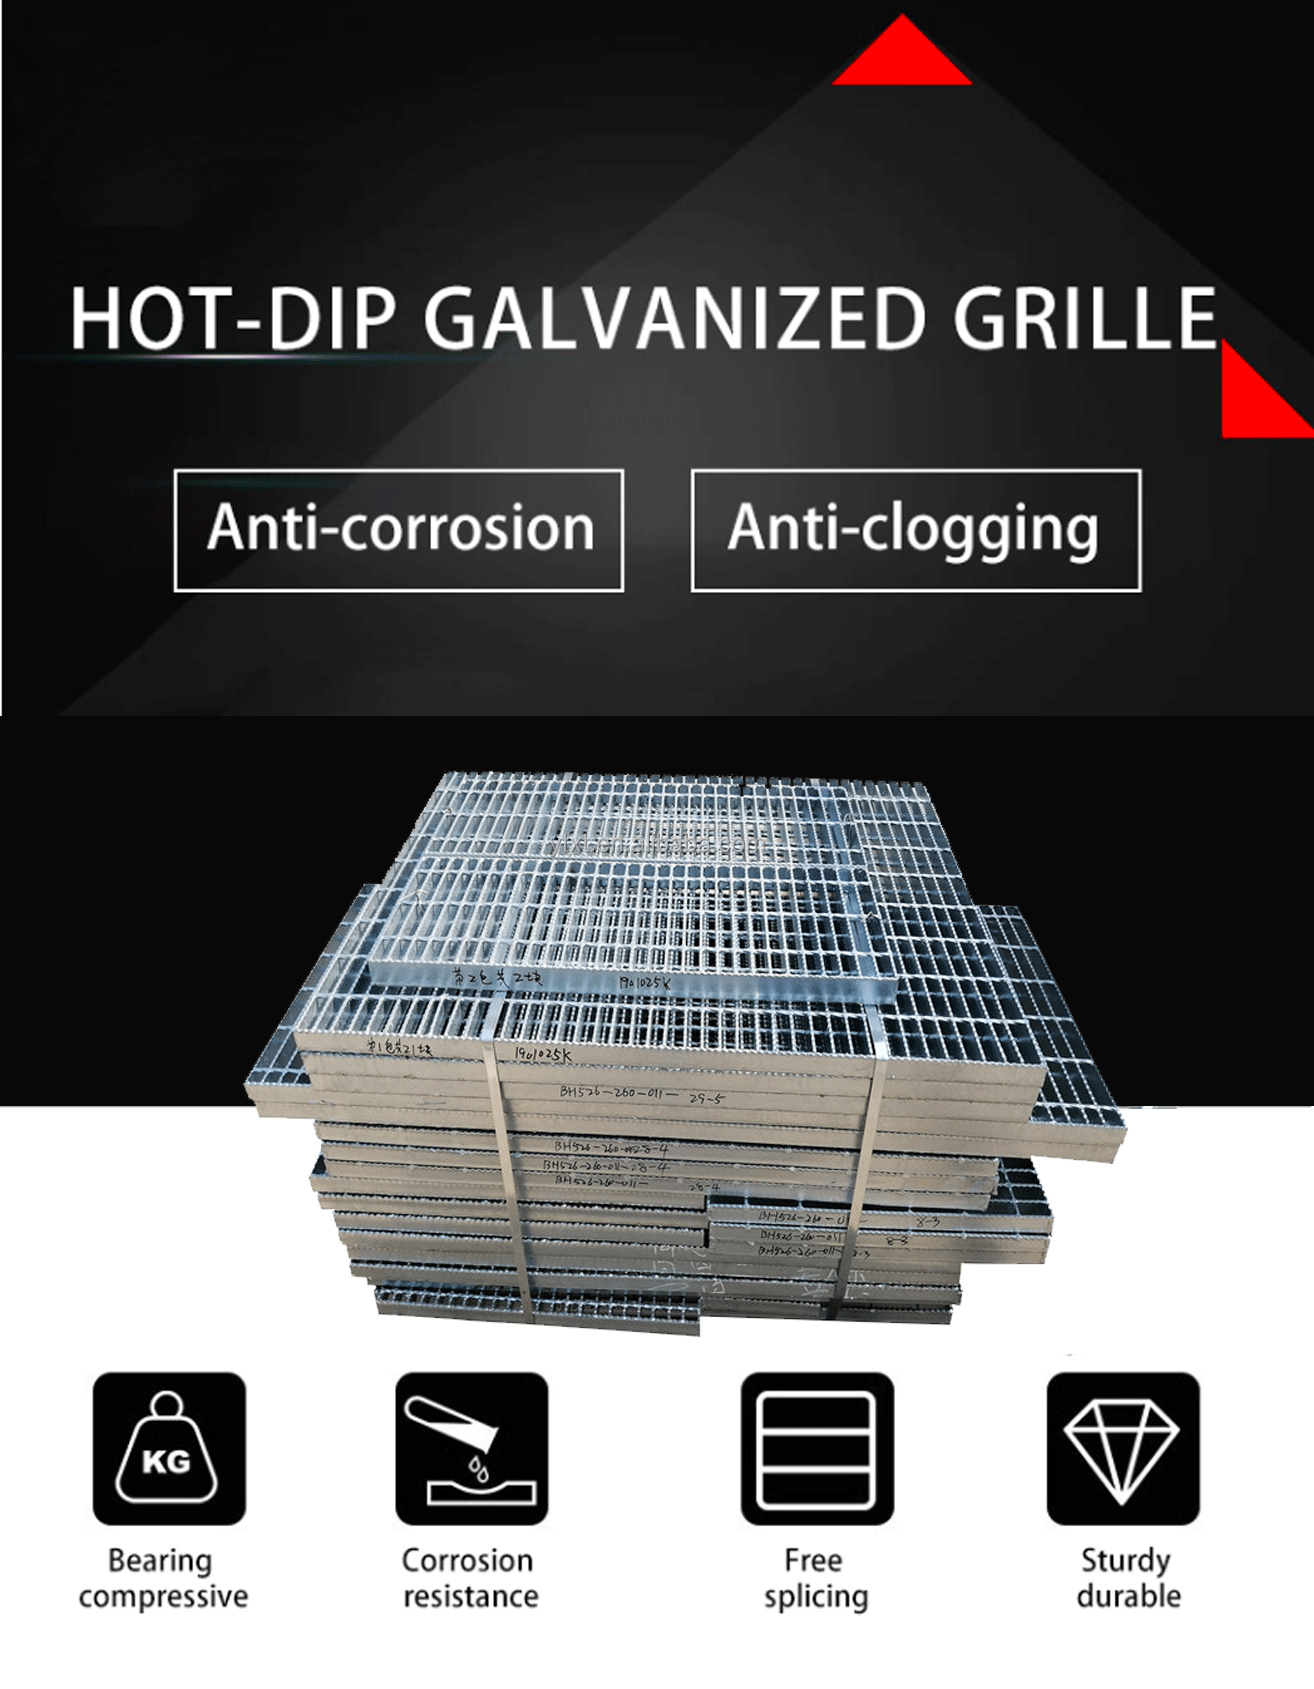 25x3 32x5 30x3 galvanized steel grid floor grating Steel frame cast iron grating heavy duty trench cover for sidewalk